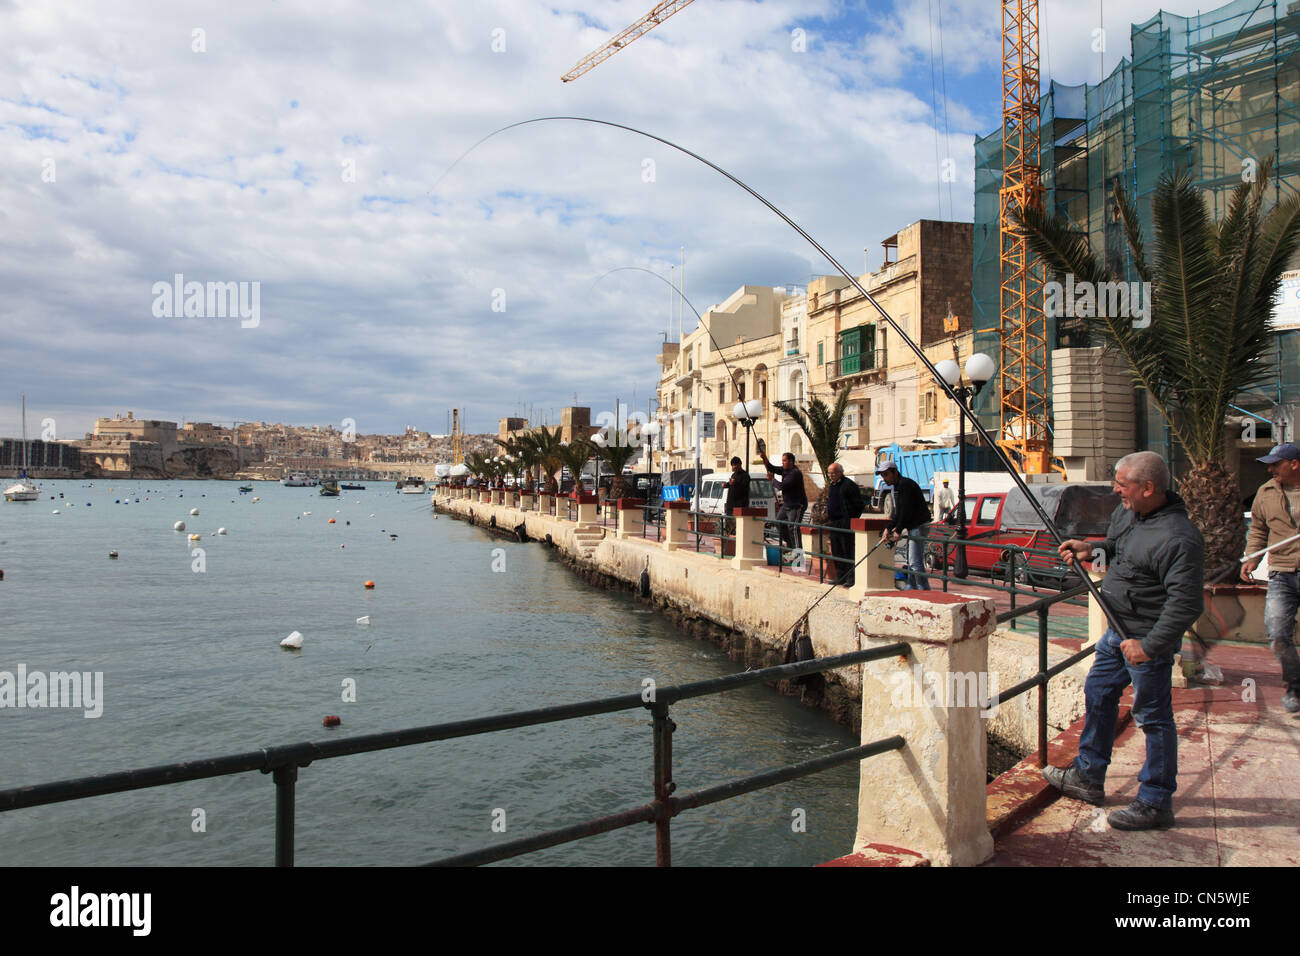 Man catches a fish using a rod and line within Kalkara Bay Malta Europe Stock Photo